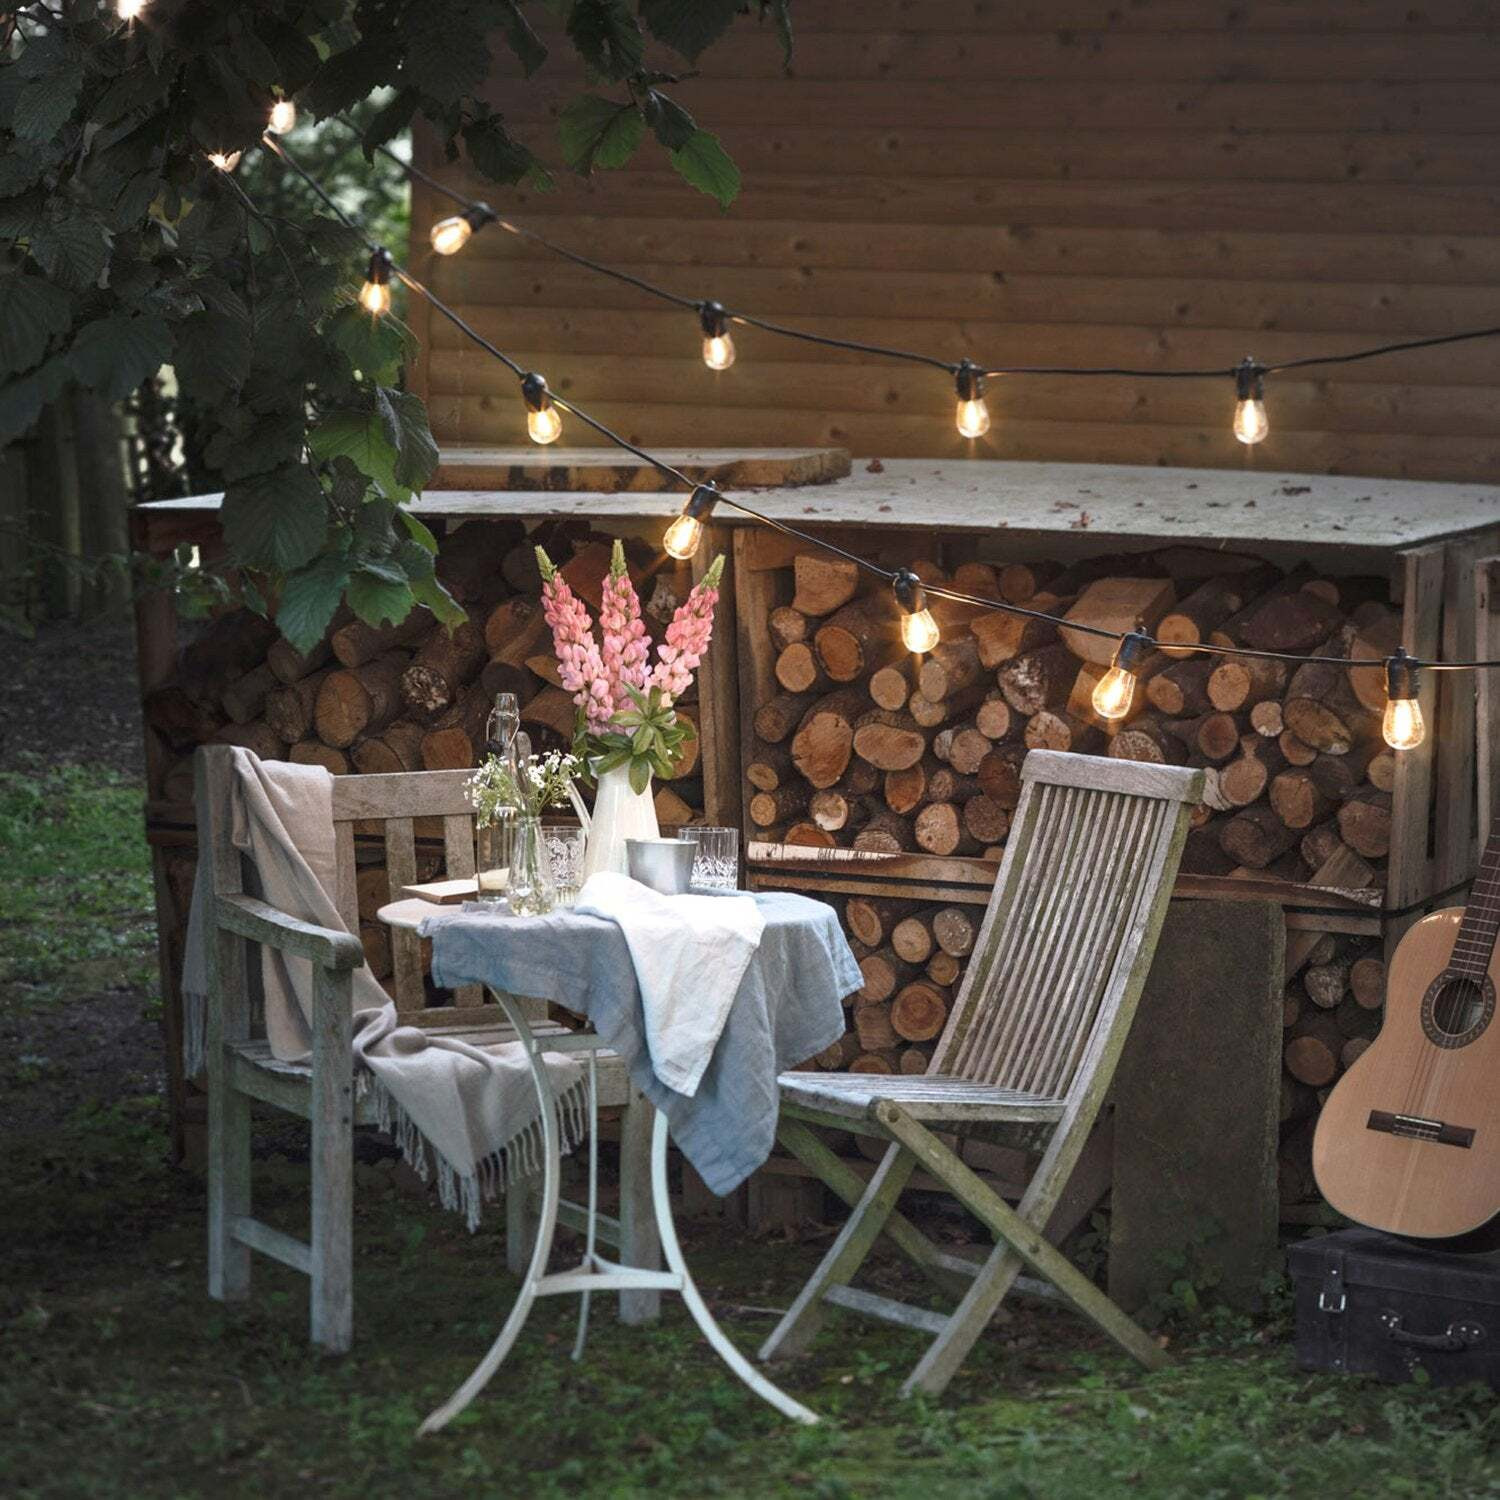 Ultimate Connect 70m 140 Warm White Festoon Lights Black Cable - image 1